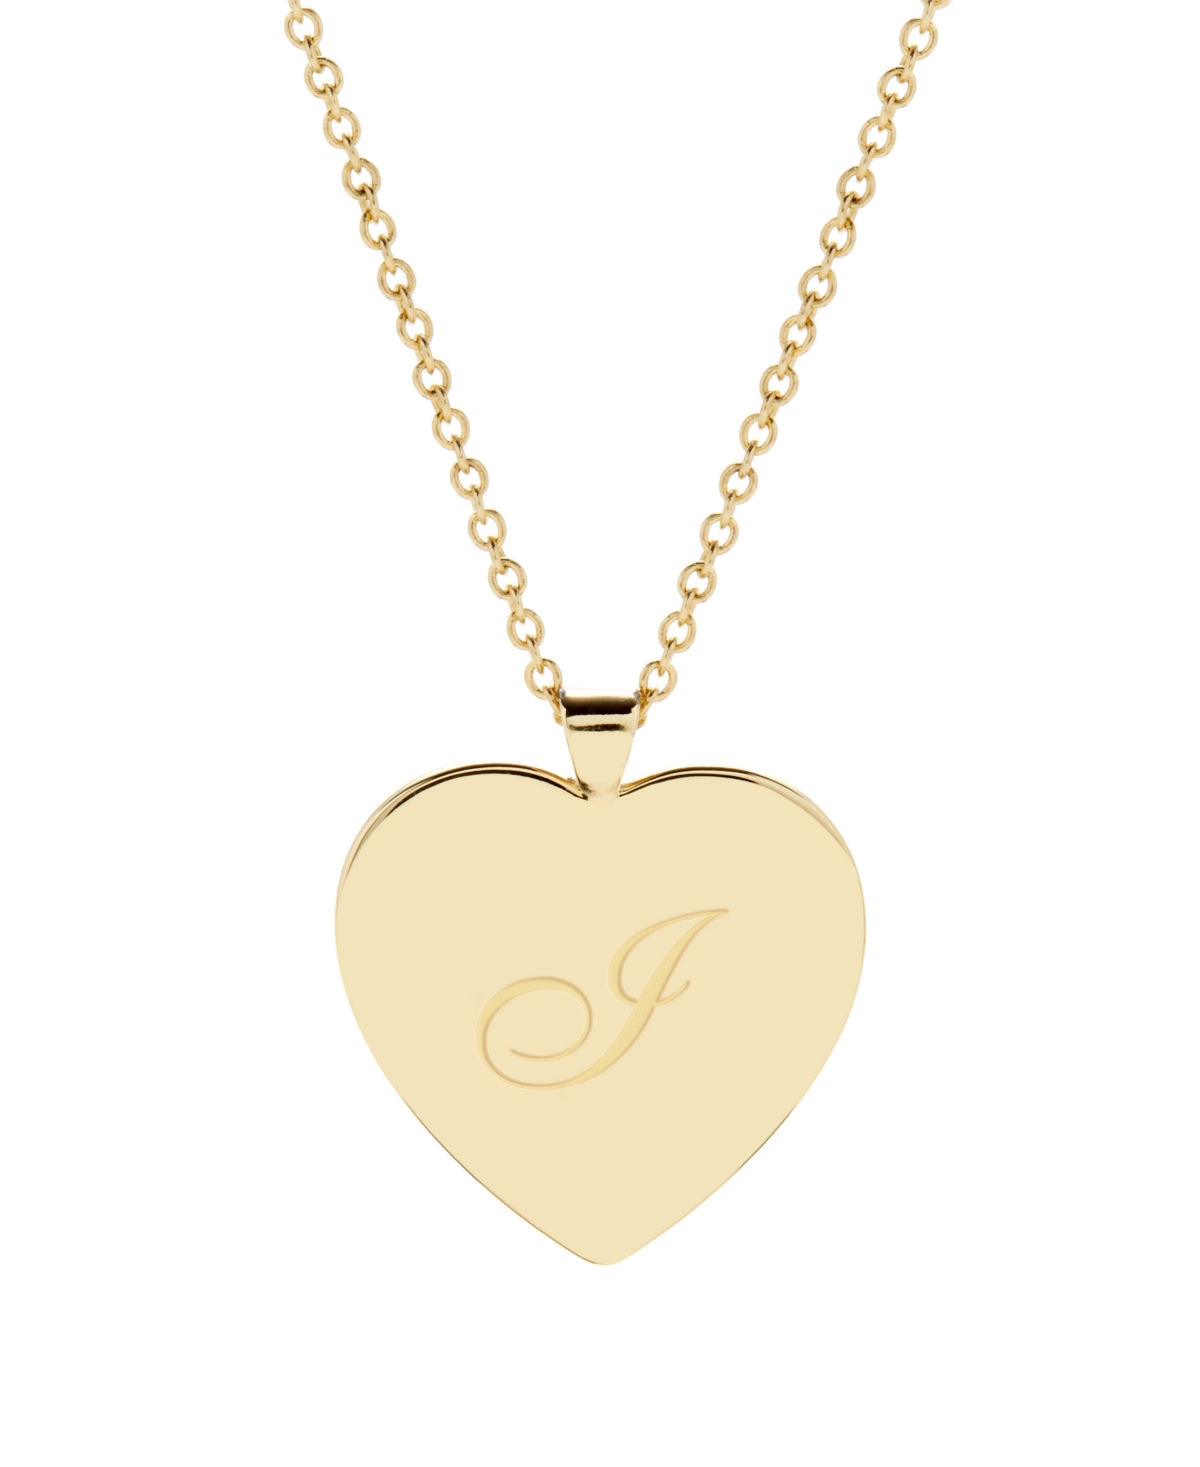 Isabel Initial Heart Gold-Plated Pendant Necklace - Gold - Y